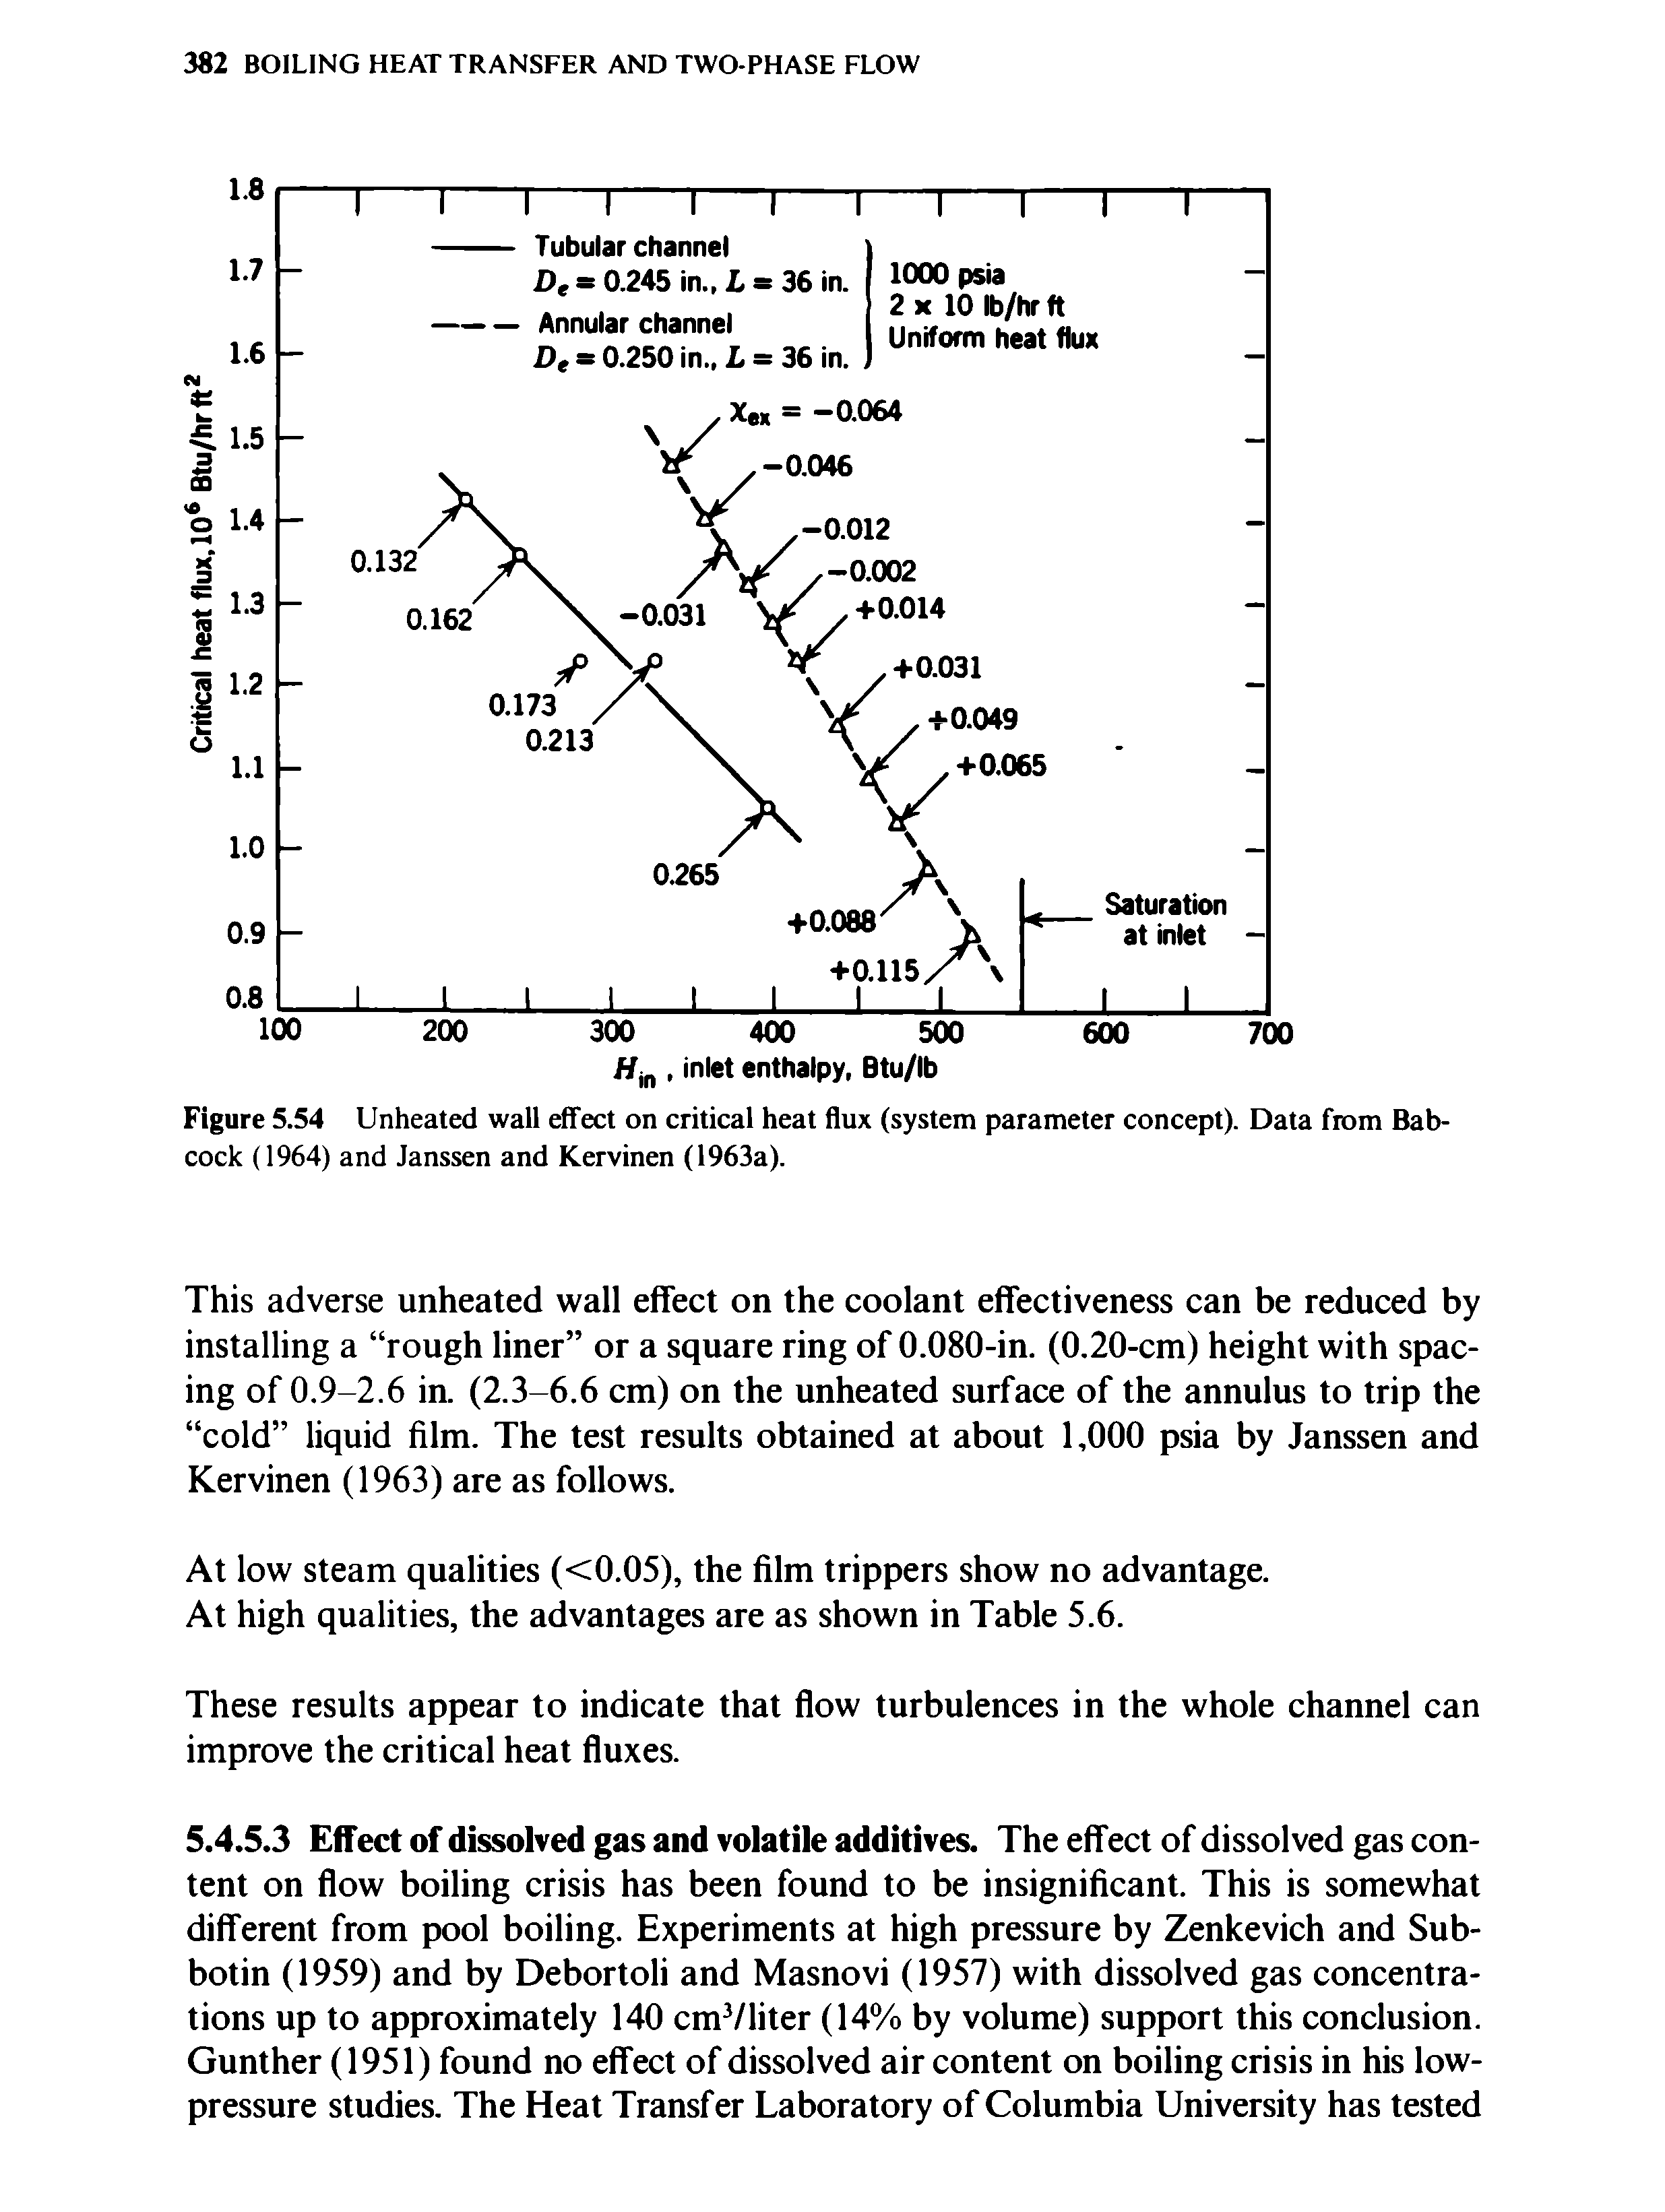 Figure 5.54 Unheated wall effect on critical heat flux (system parameter concept). Data from Babcock (1964) and Janssen and Kervinen (1963a).